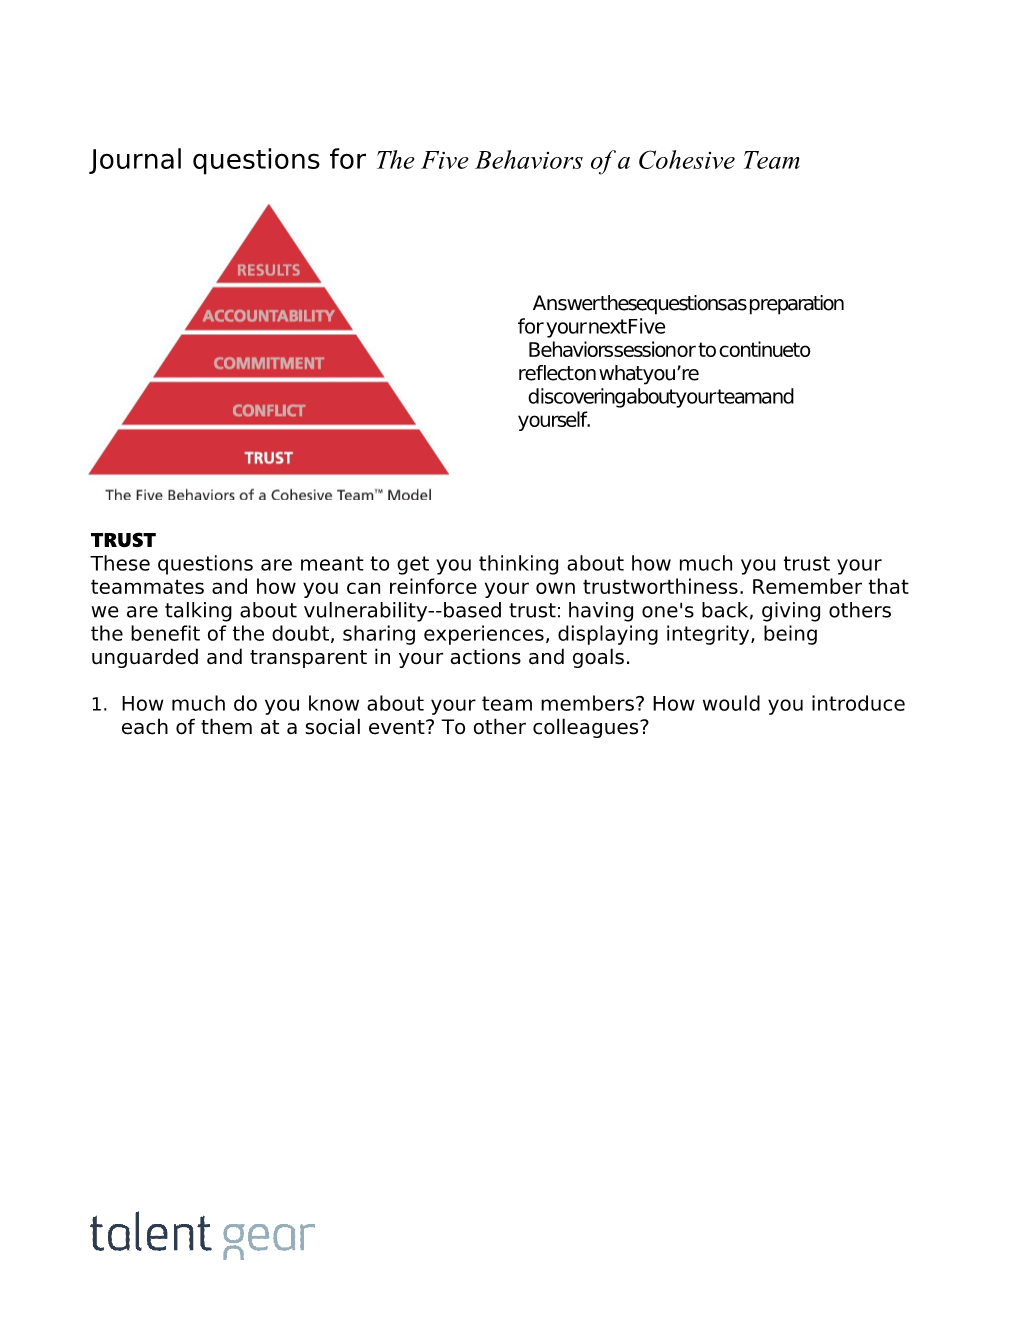 Journal Questions for the Five Behaviors of a Cohesive Team